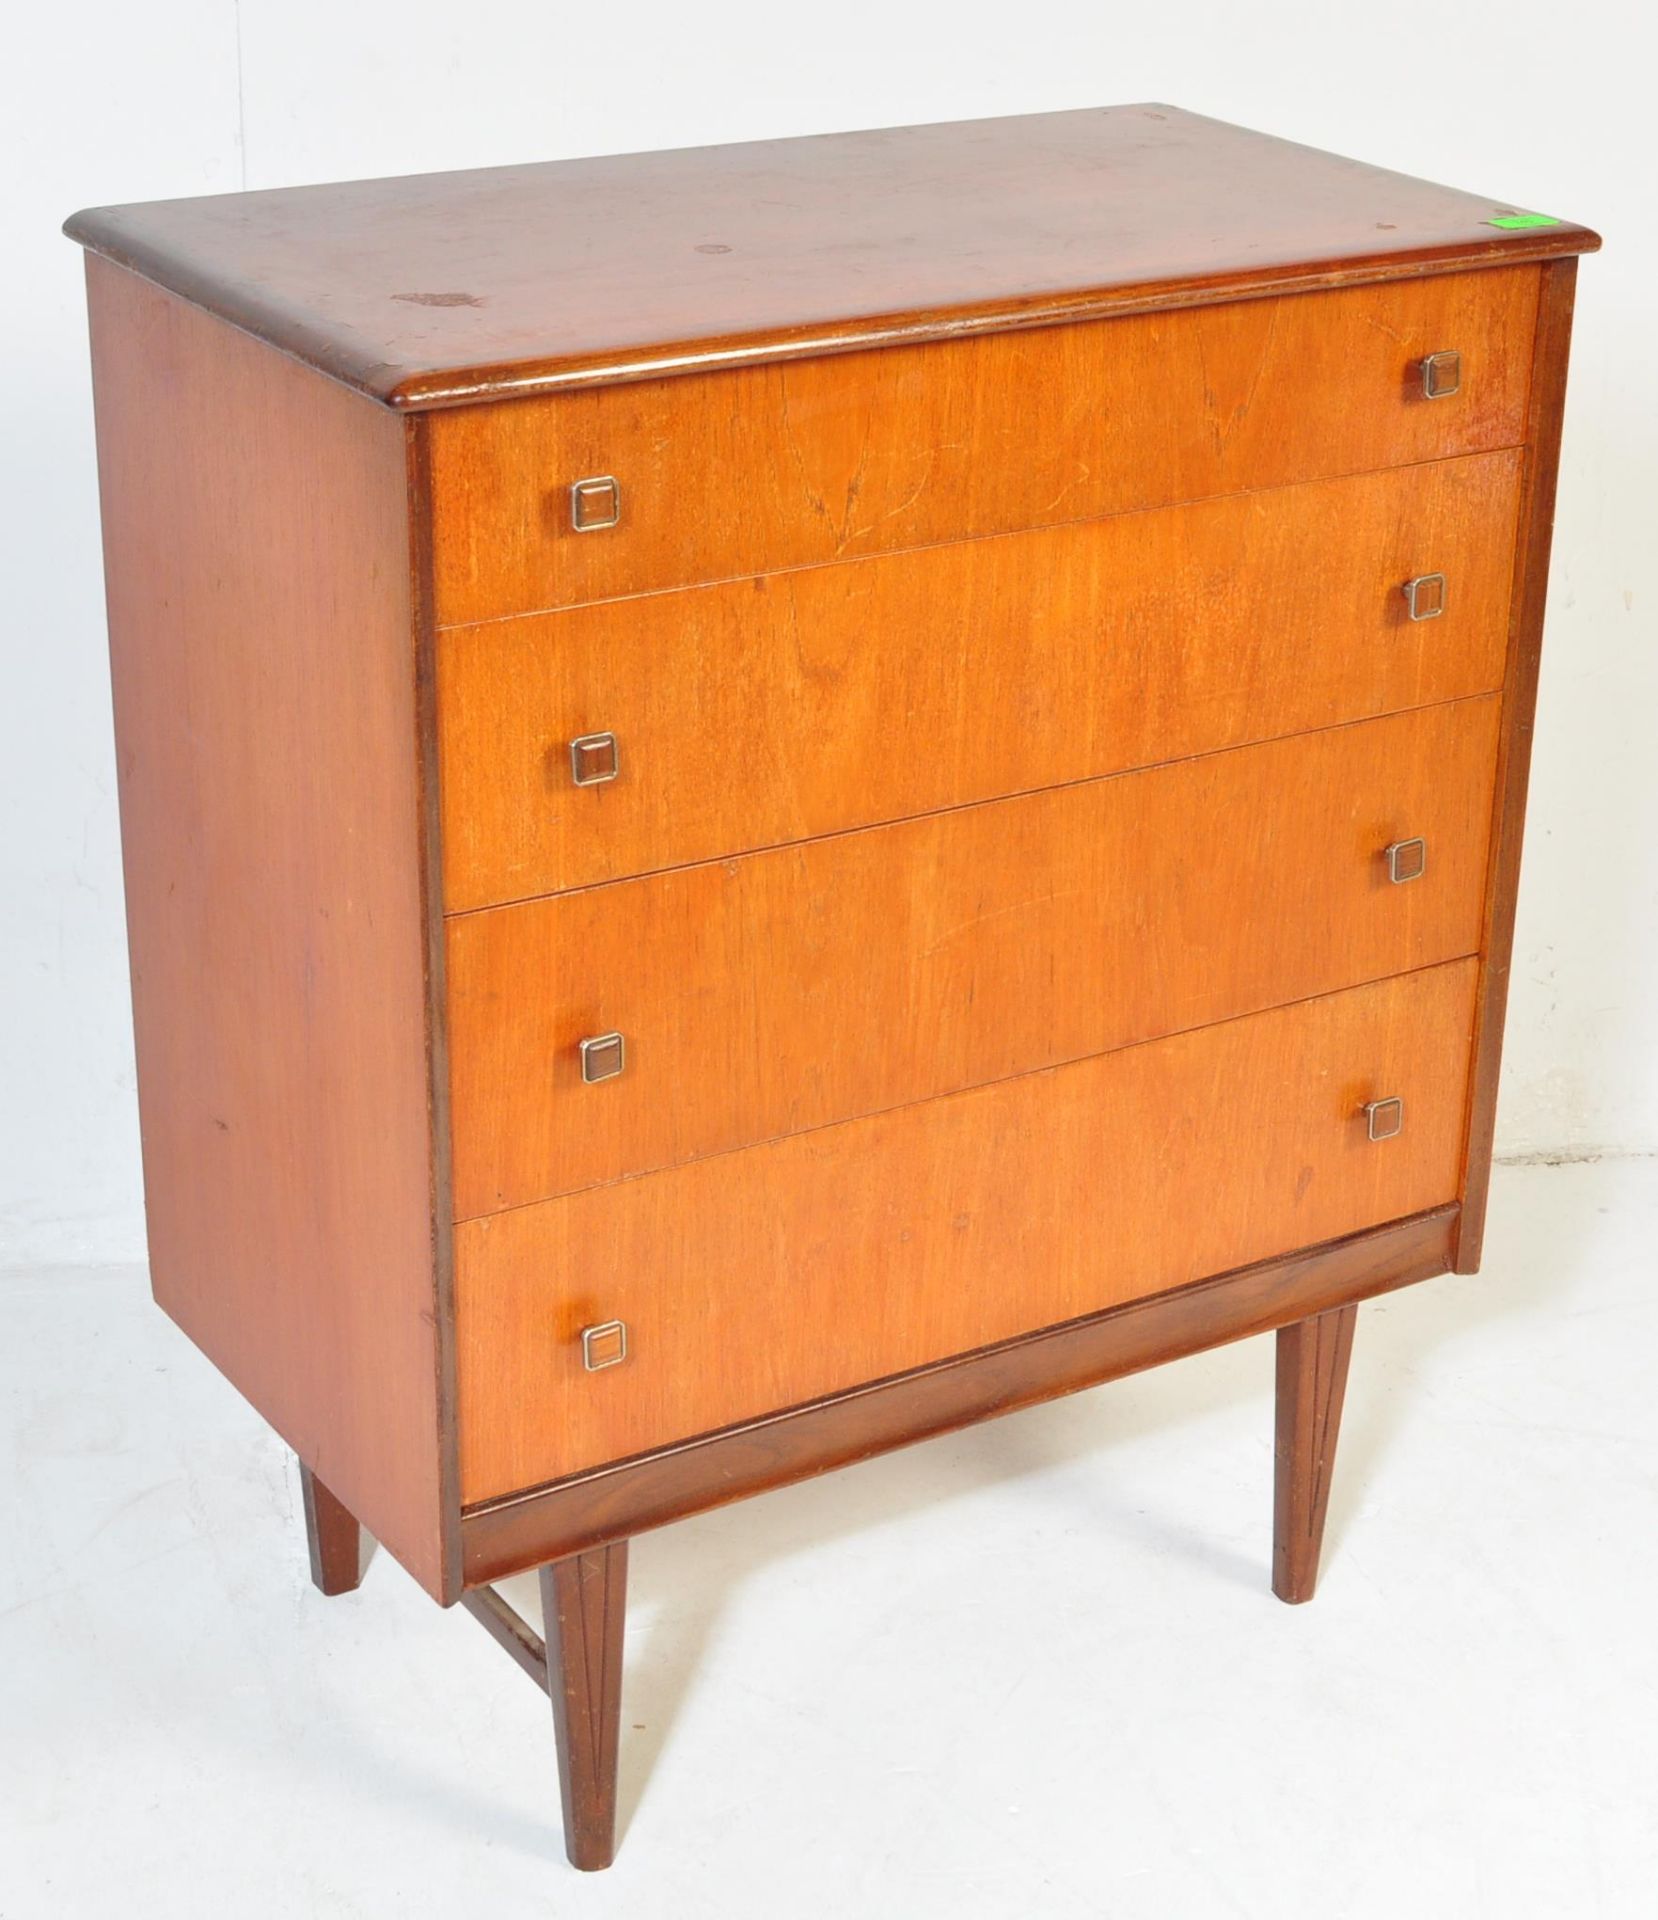 MID 20TH CENTURY TEAK CHEST OF DRAWERS - Image 2 of 5